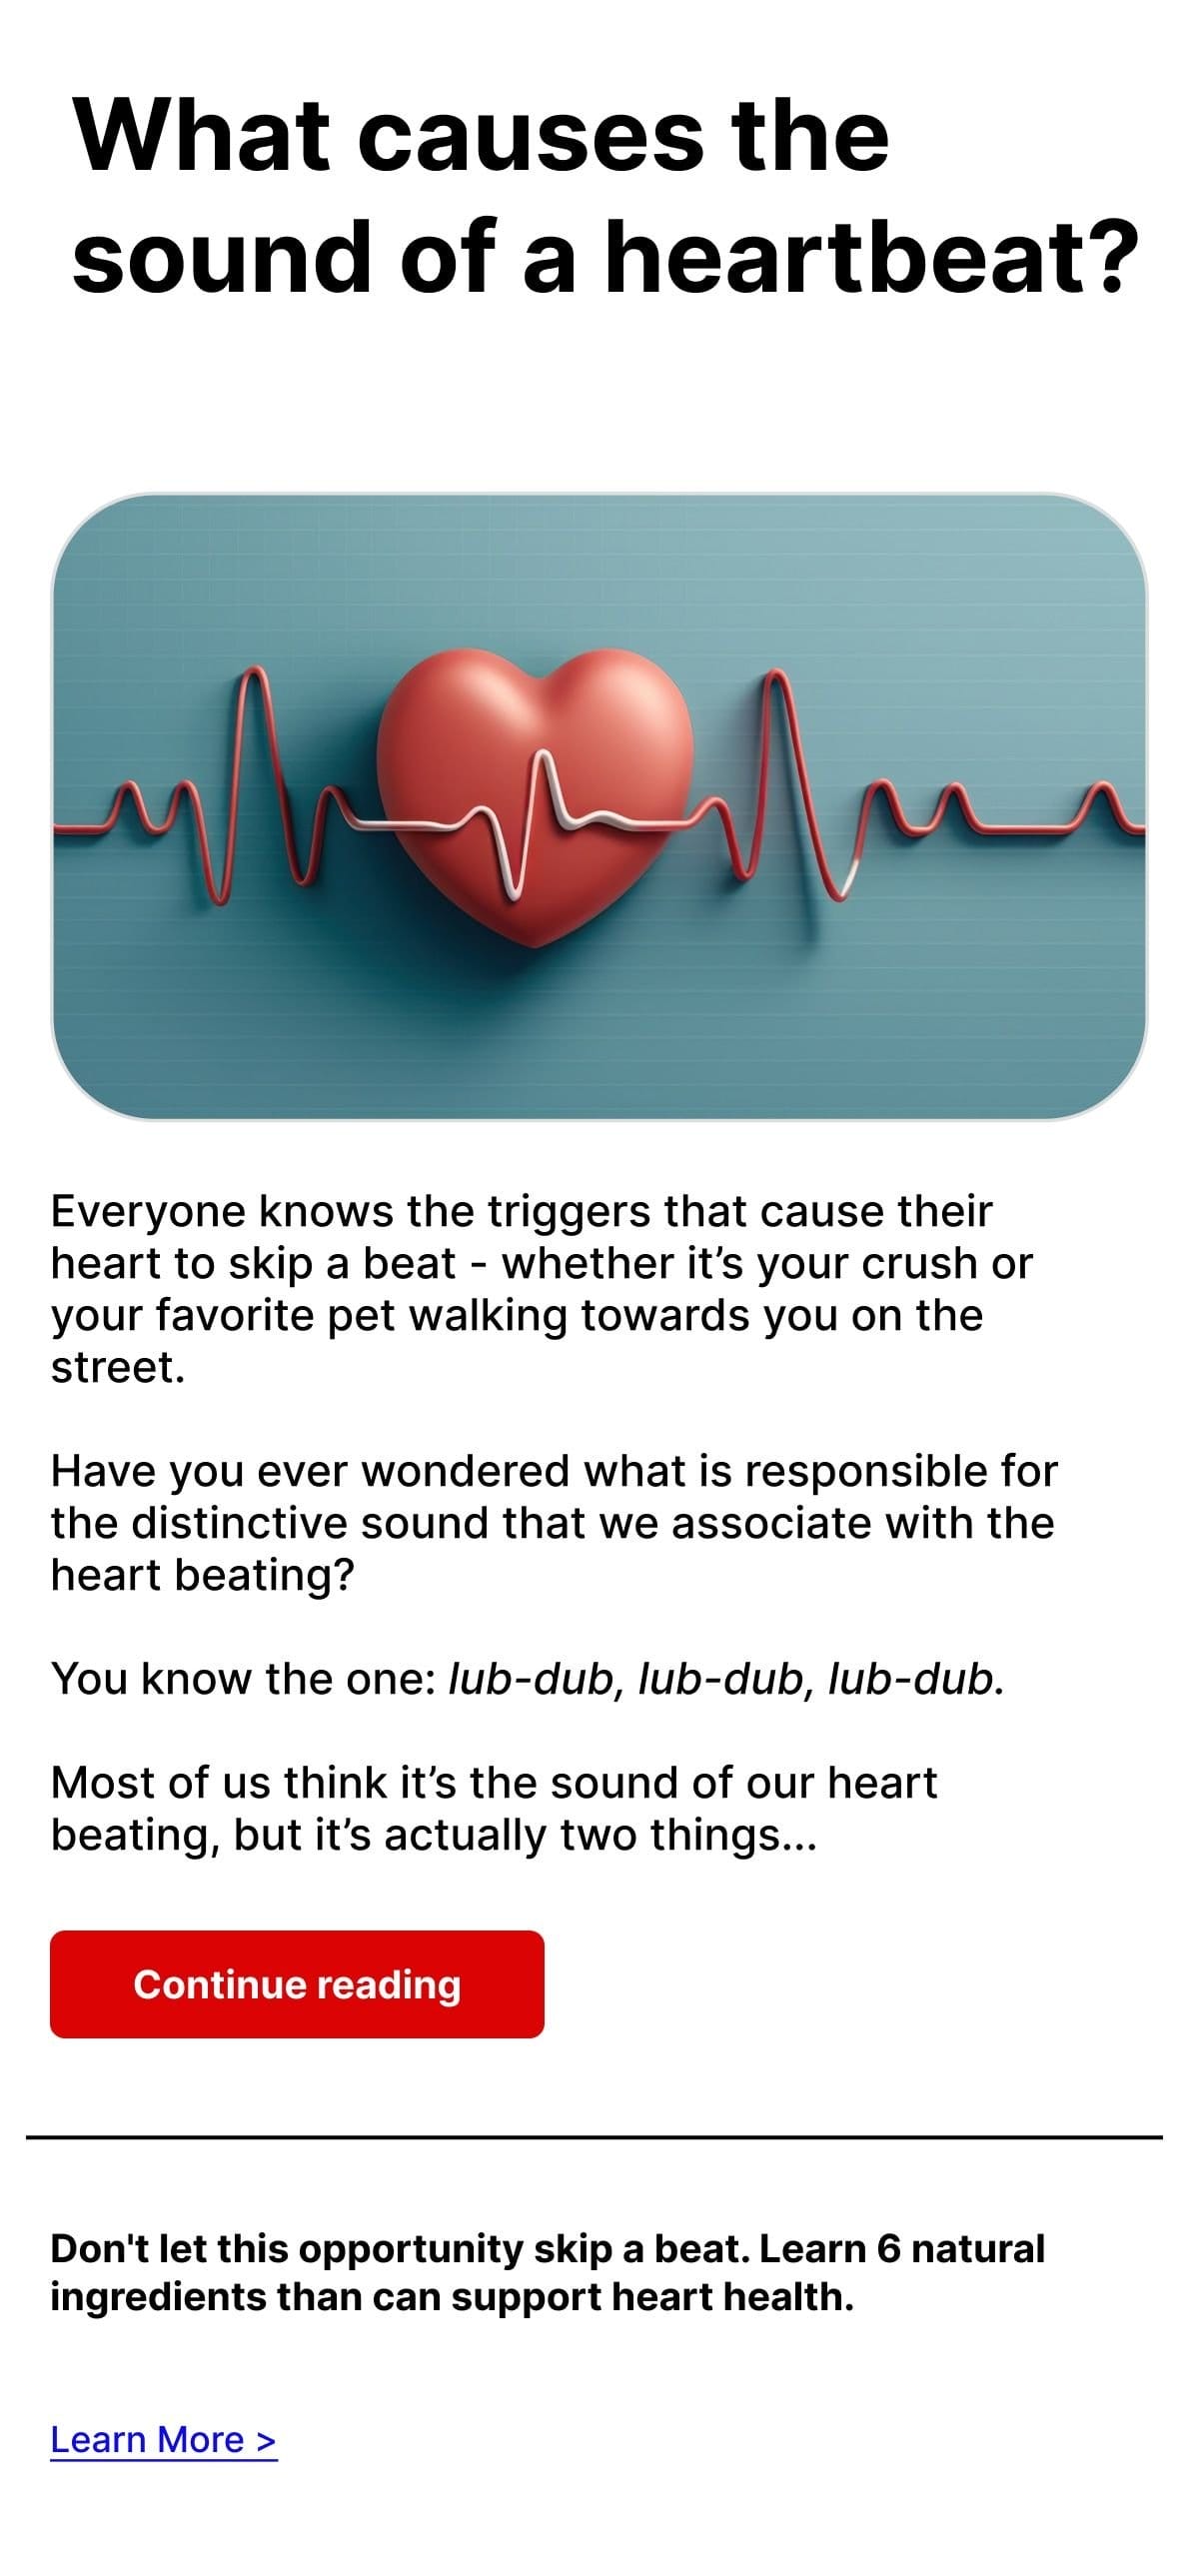 What causes the sound of a heartbeat?